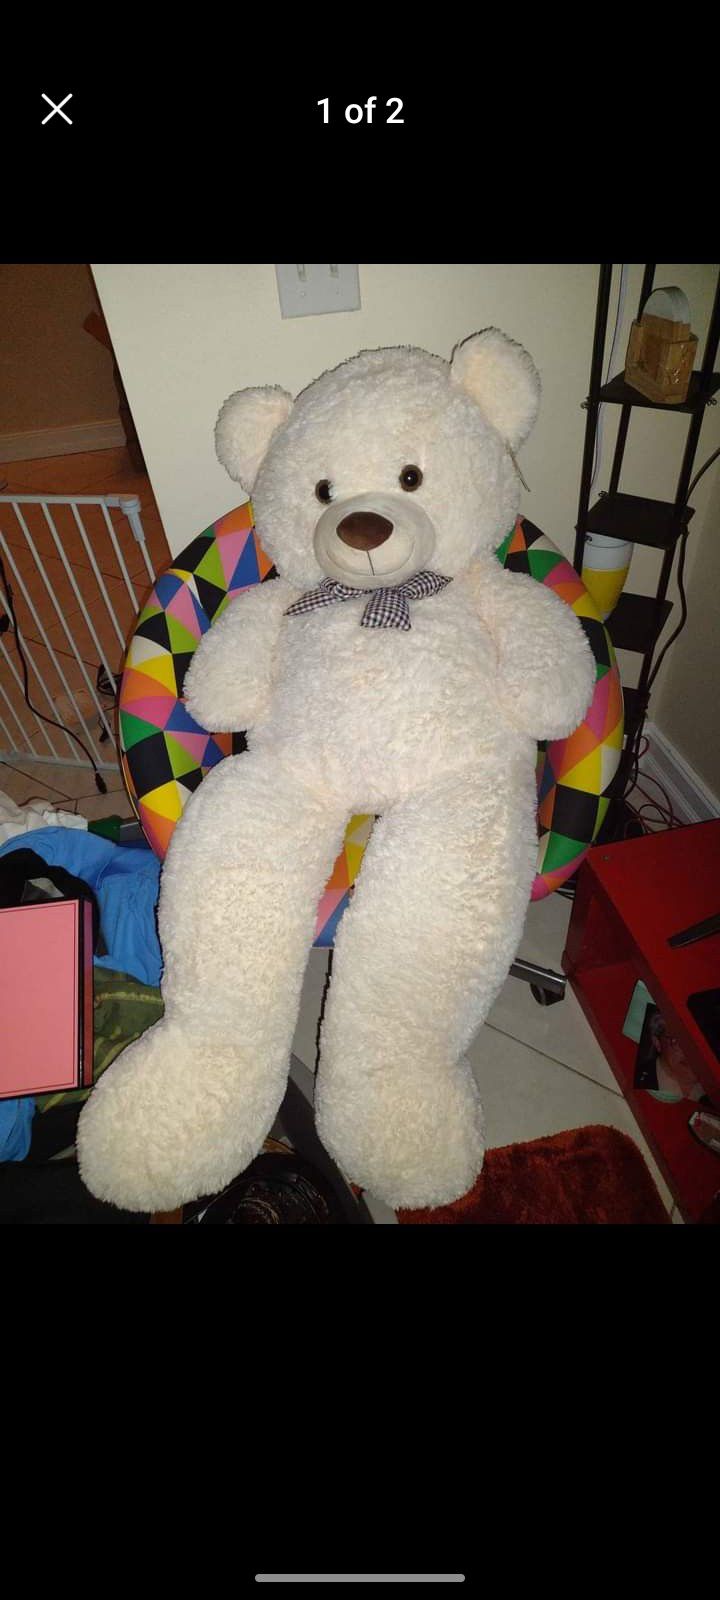 Morismos Giant 48" Teddy Bear New with tags
Super Soft